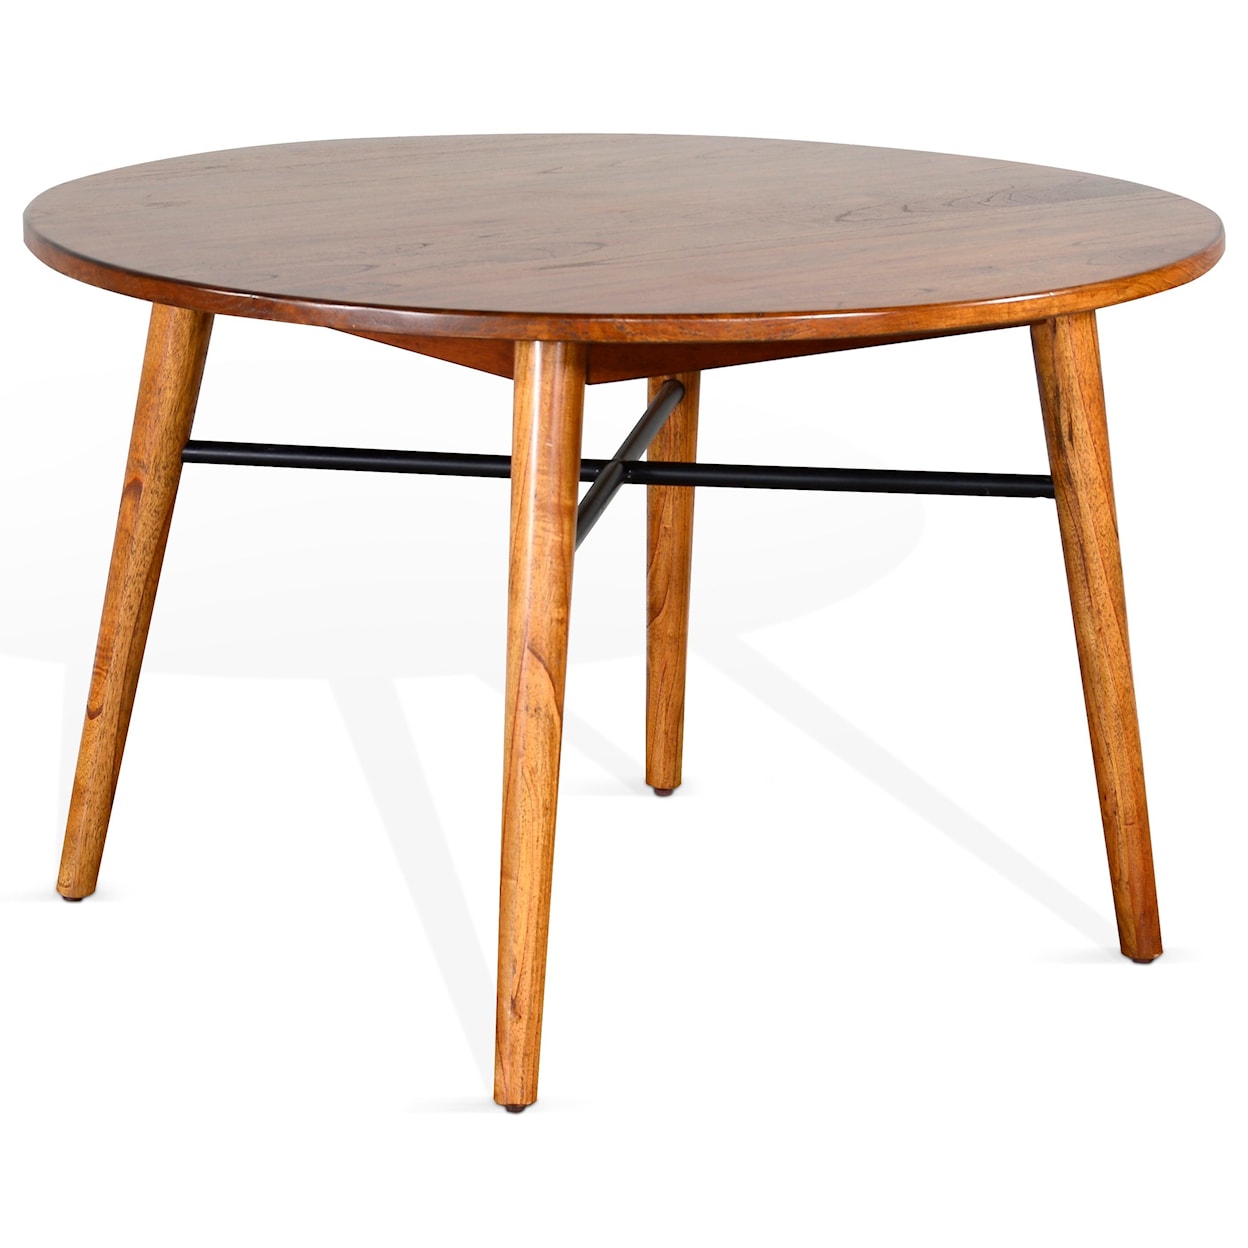 Sunny Designs American Modern Round Table